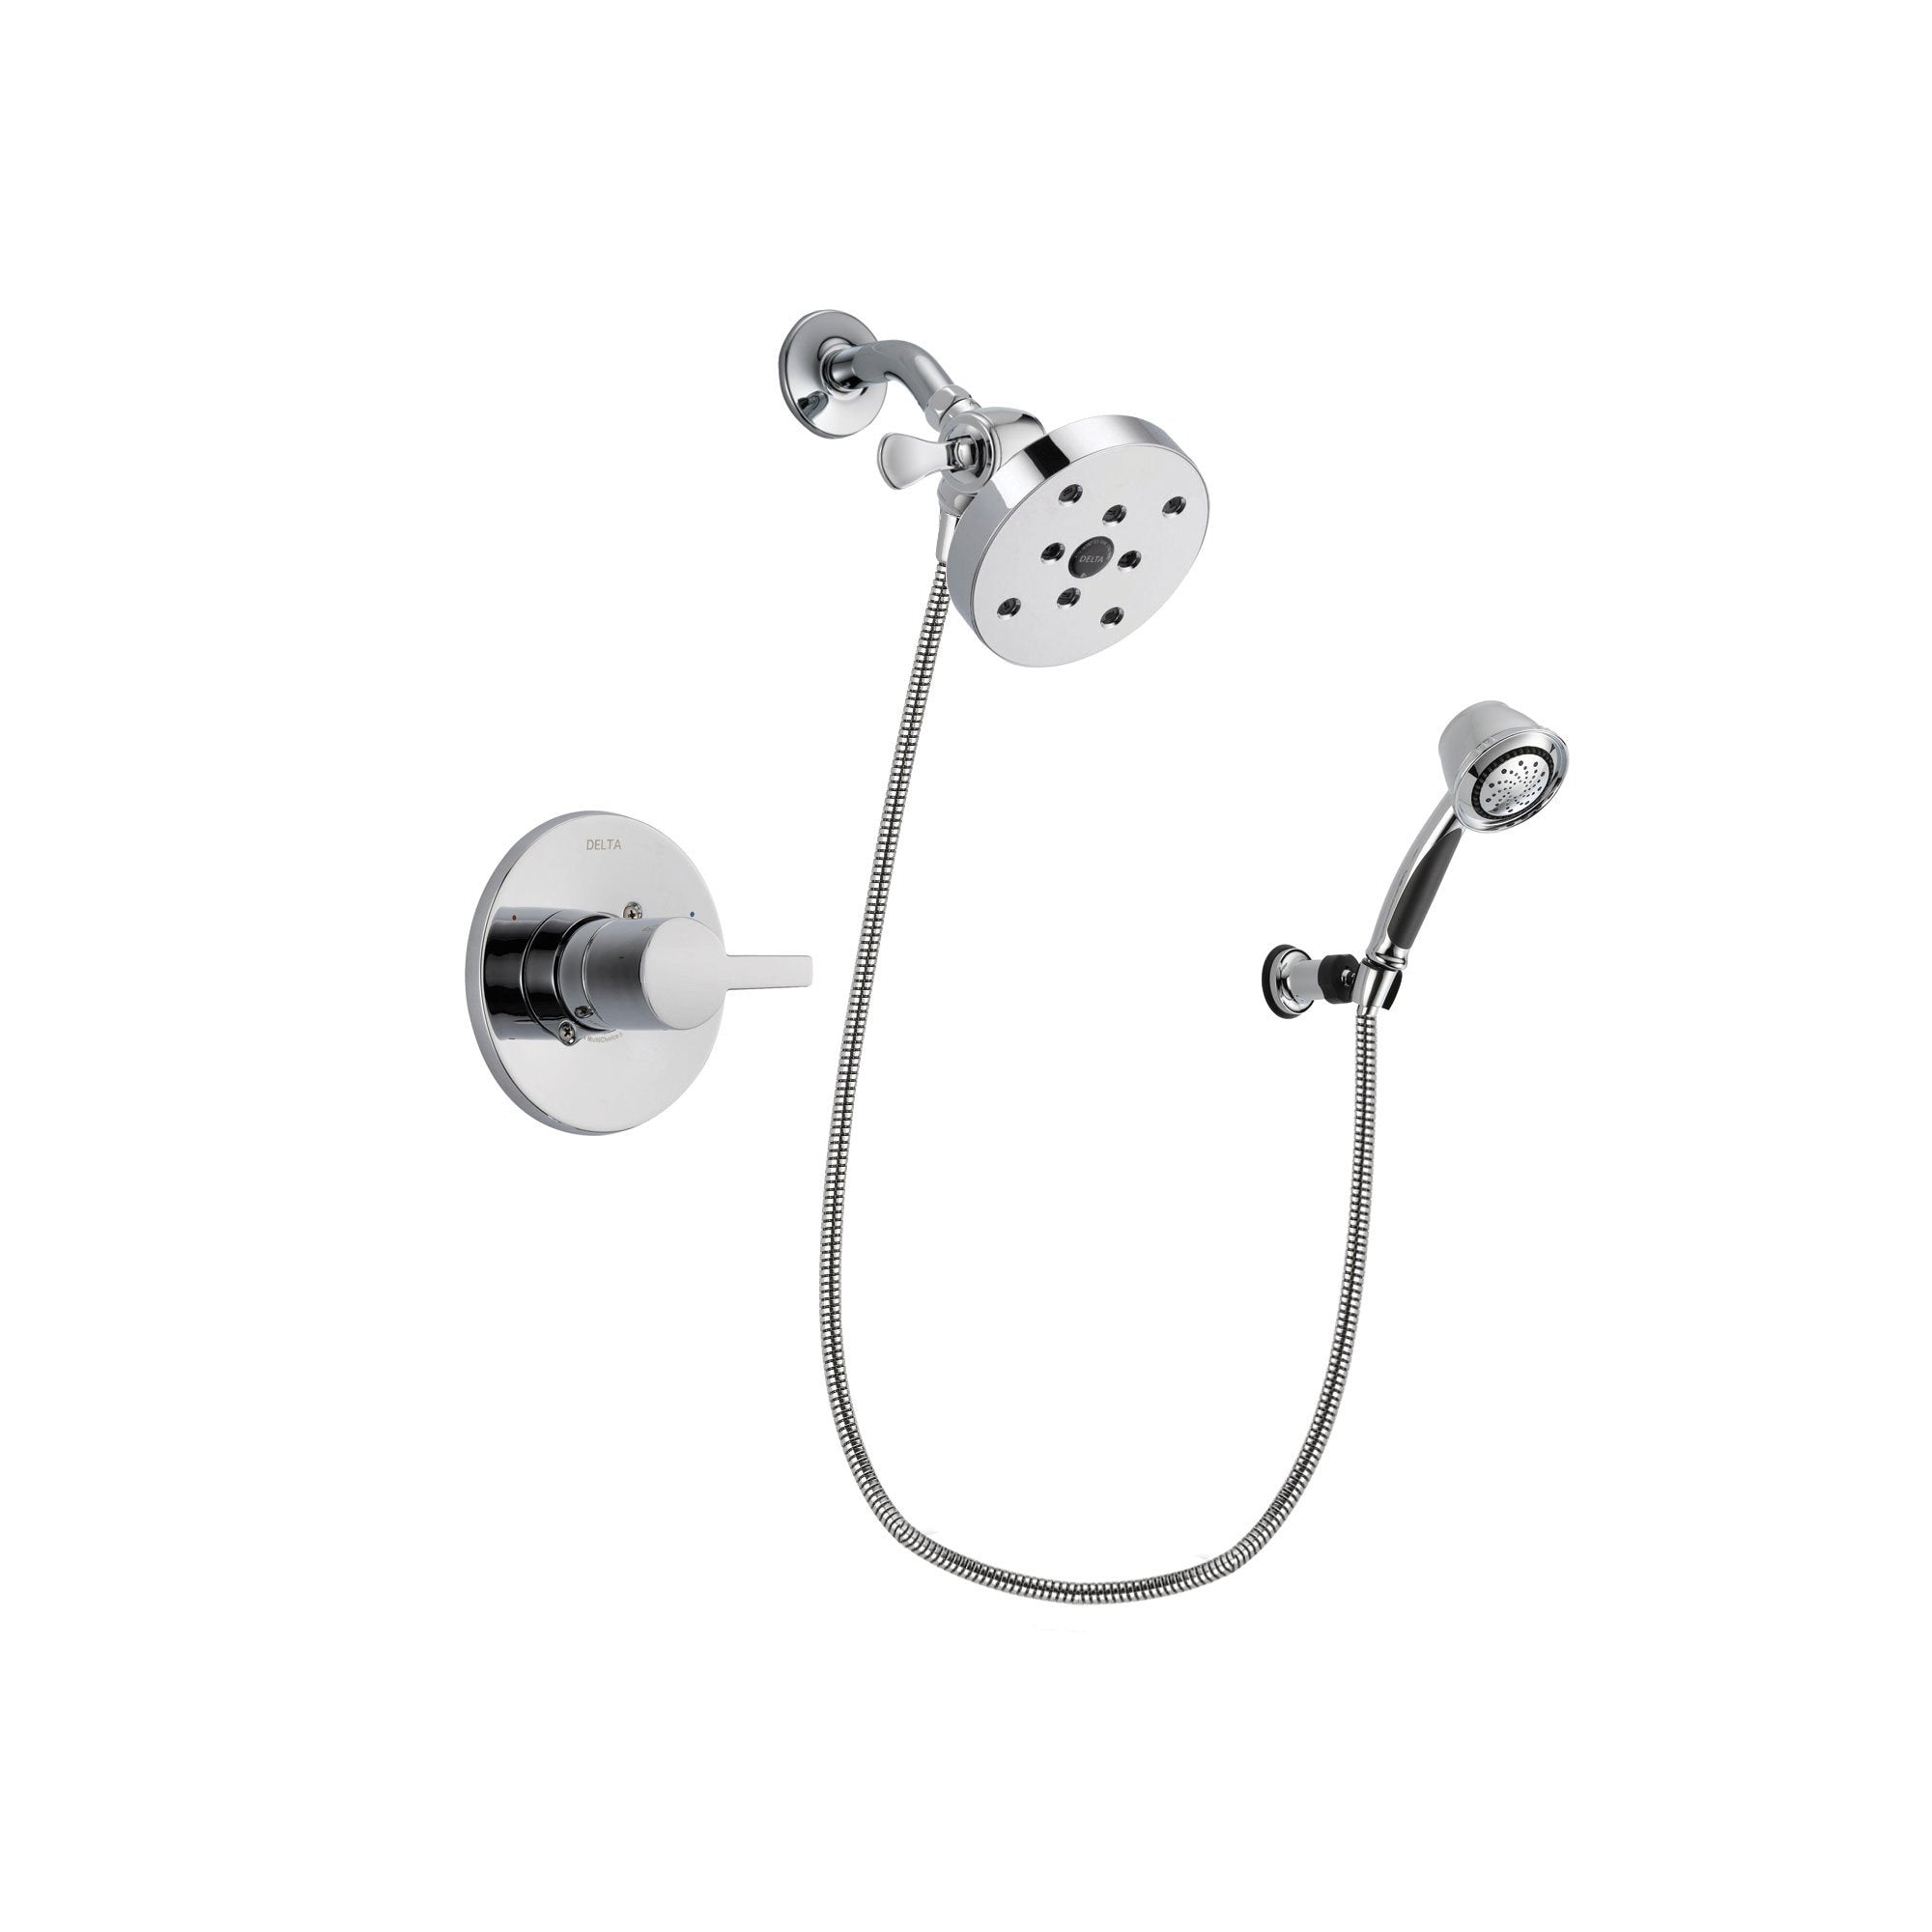 Delta Compel Chrome Shower Faucet System w/ Shower Head and Hand Shower DSP0406V